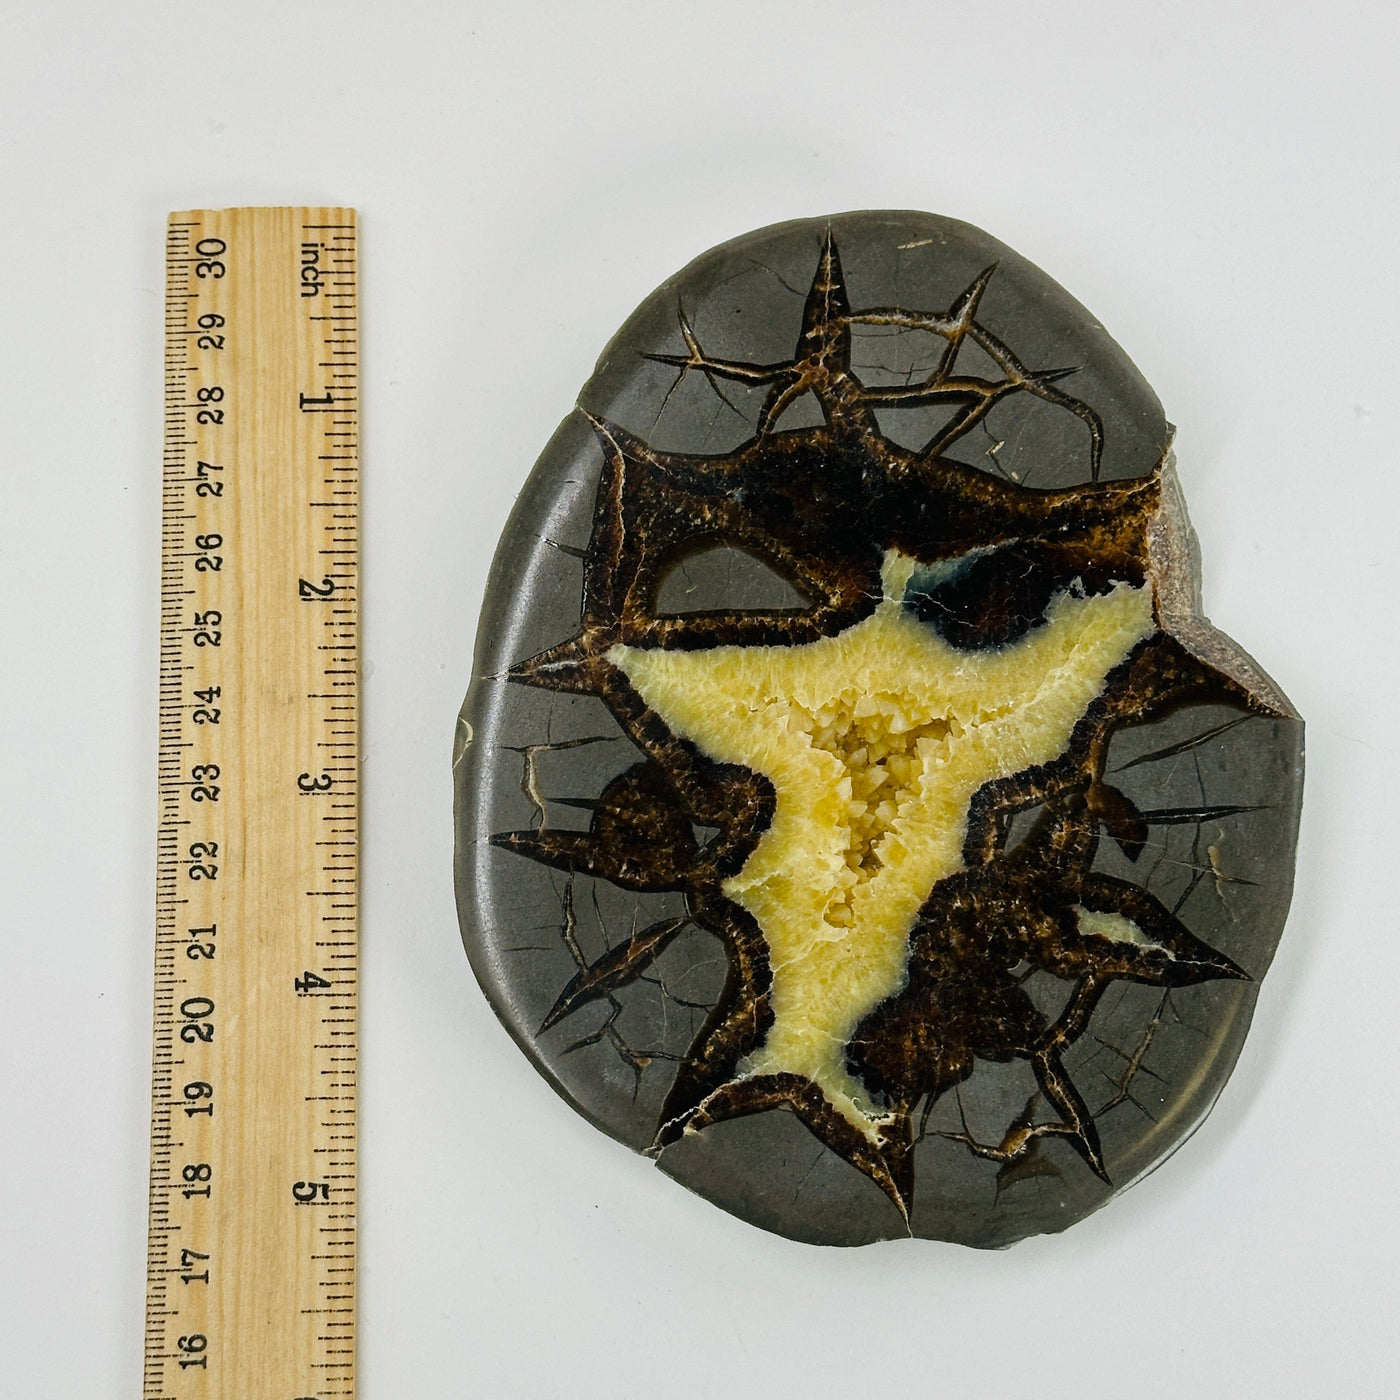 septarian platter next to a ruler for size reference